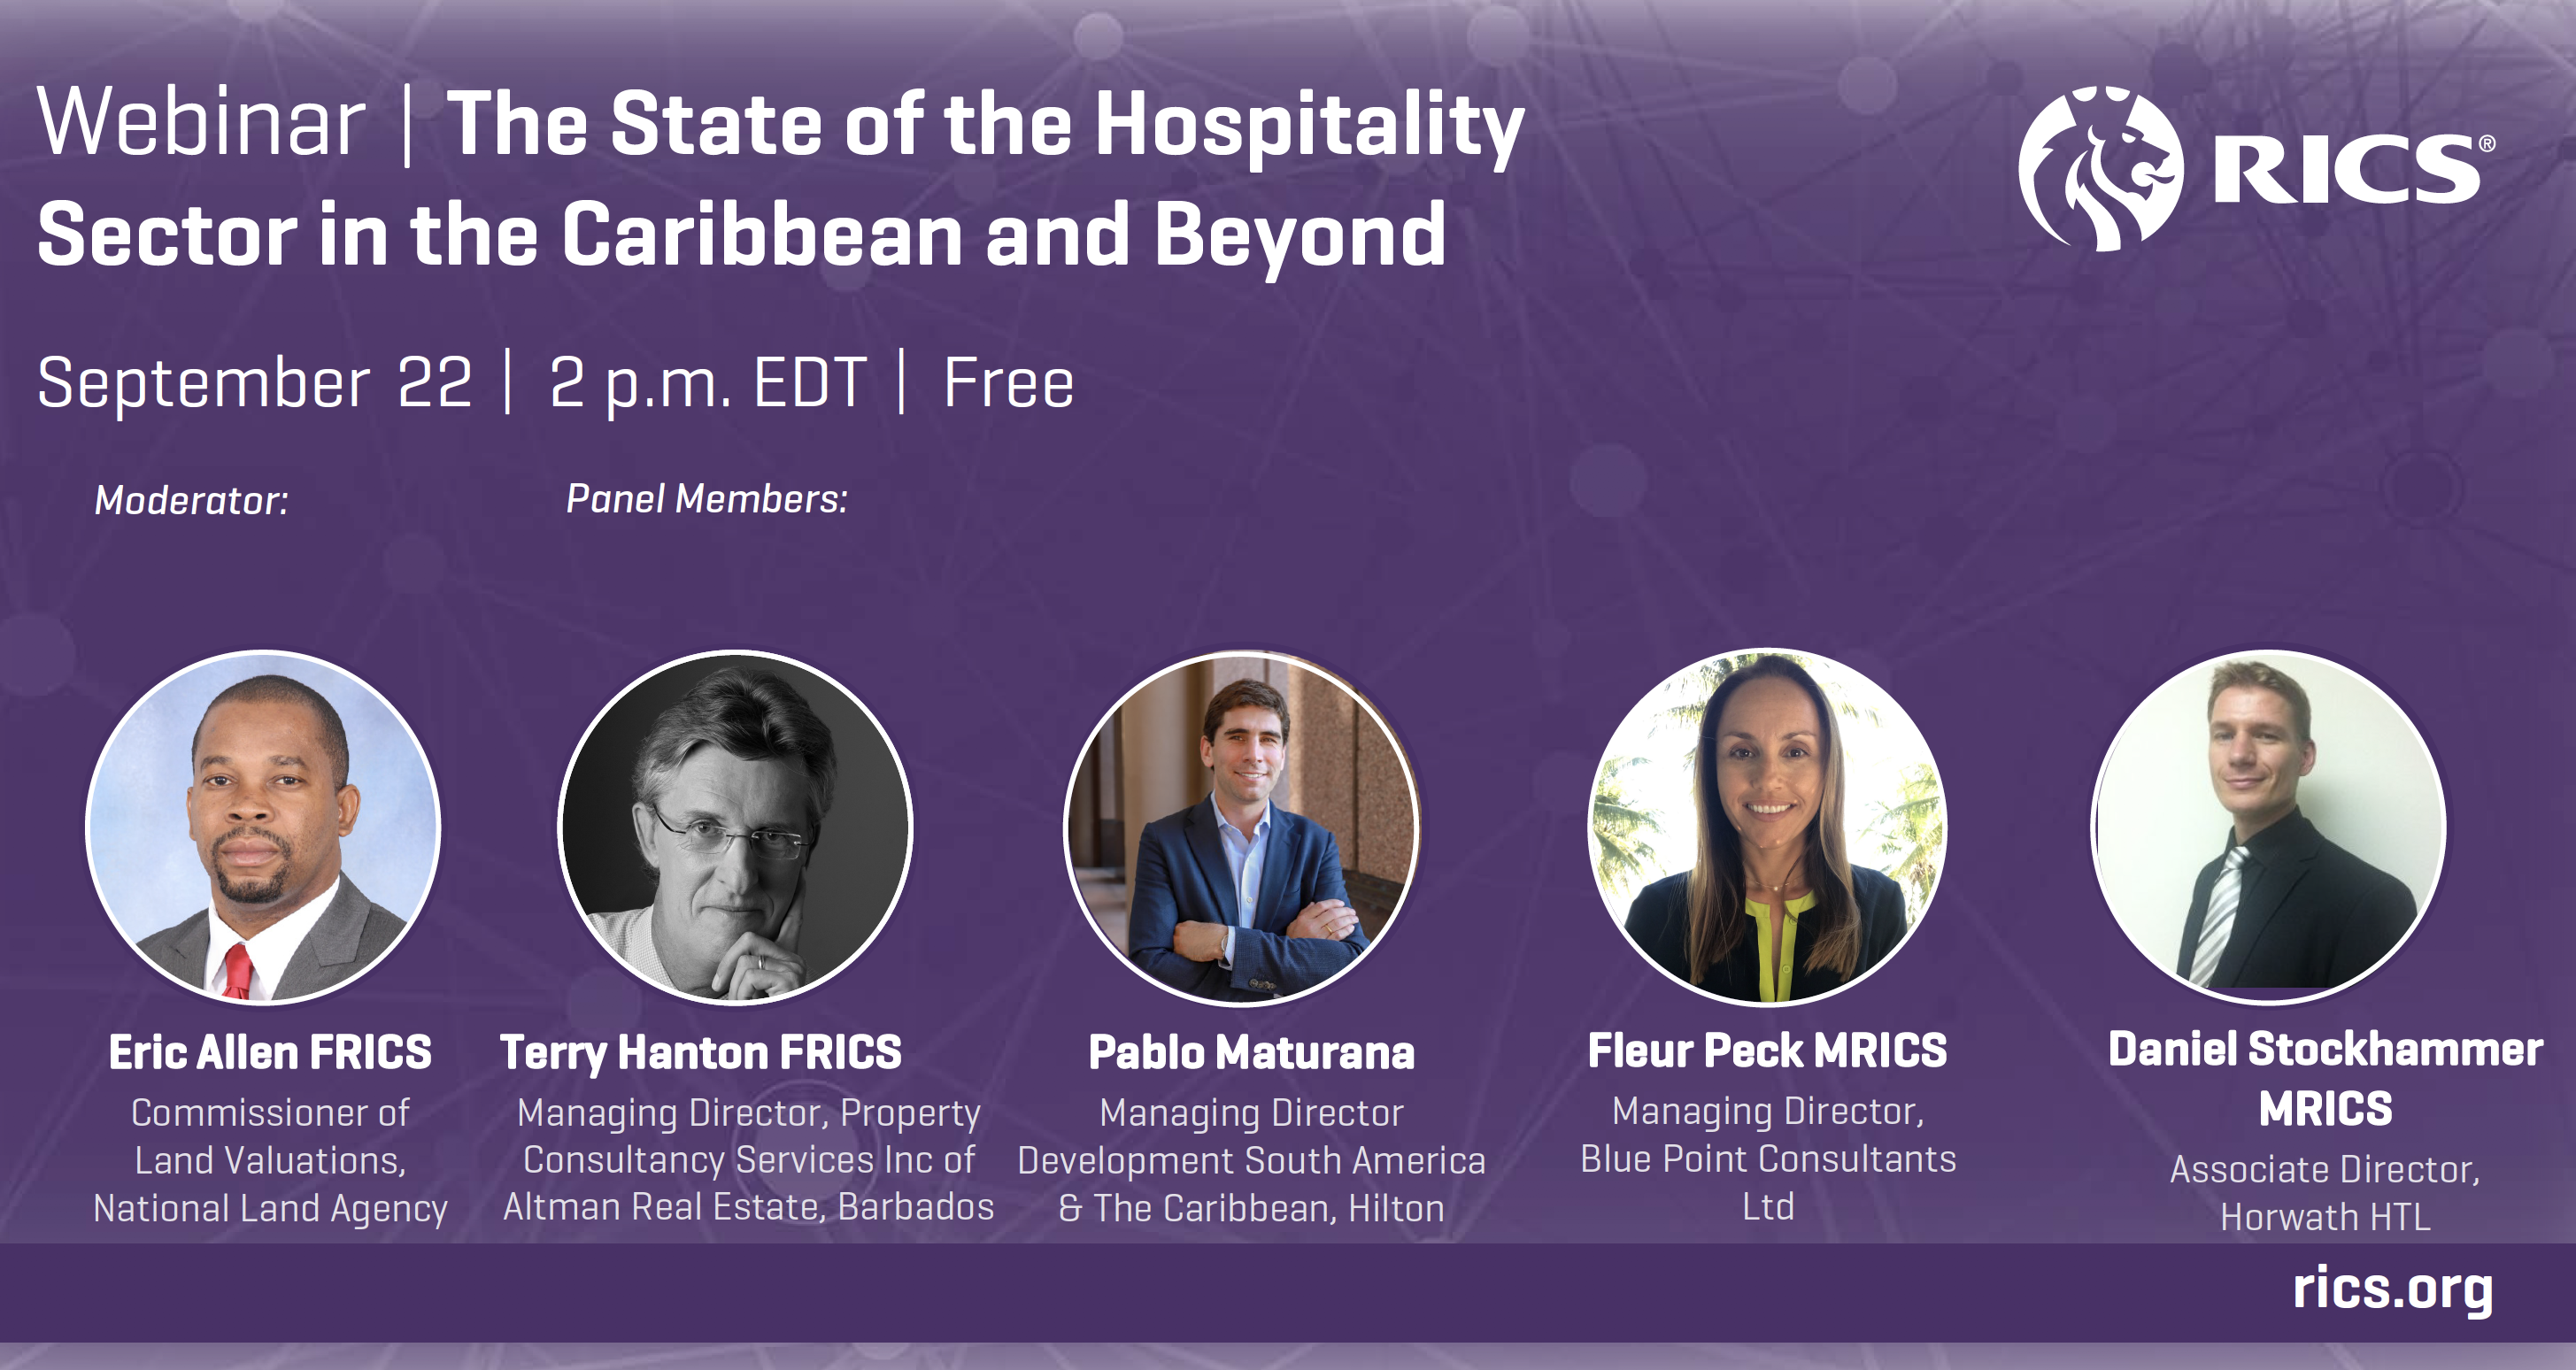 The State of the Hospitality Sector in the Caribbean & Beyond Webinar, Tues 22 Sept 2020